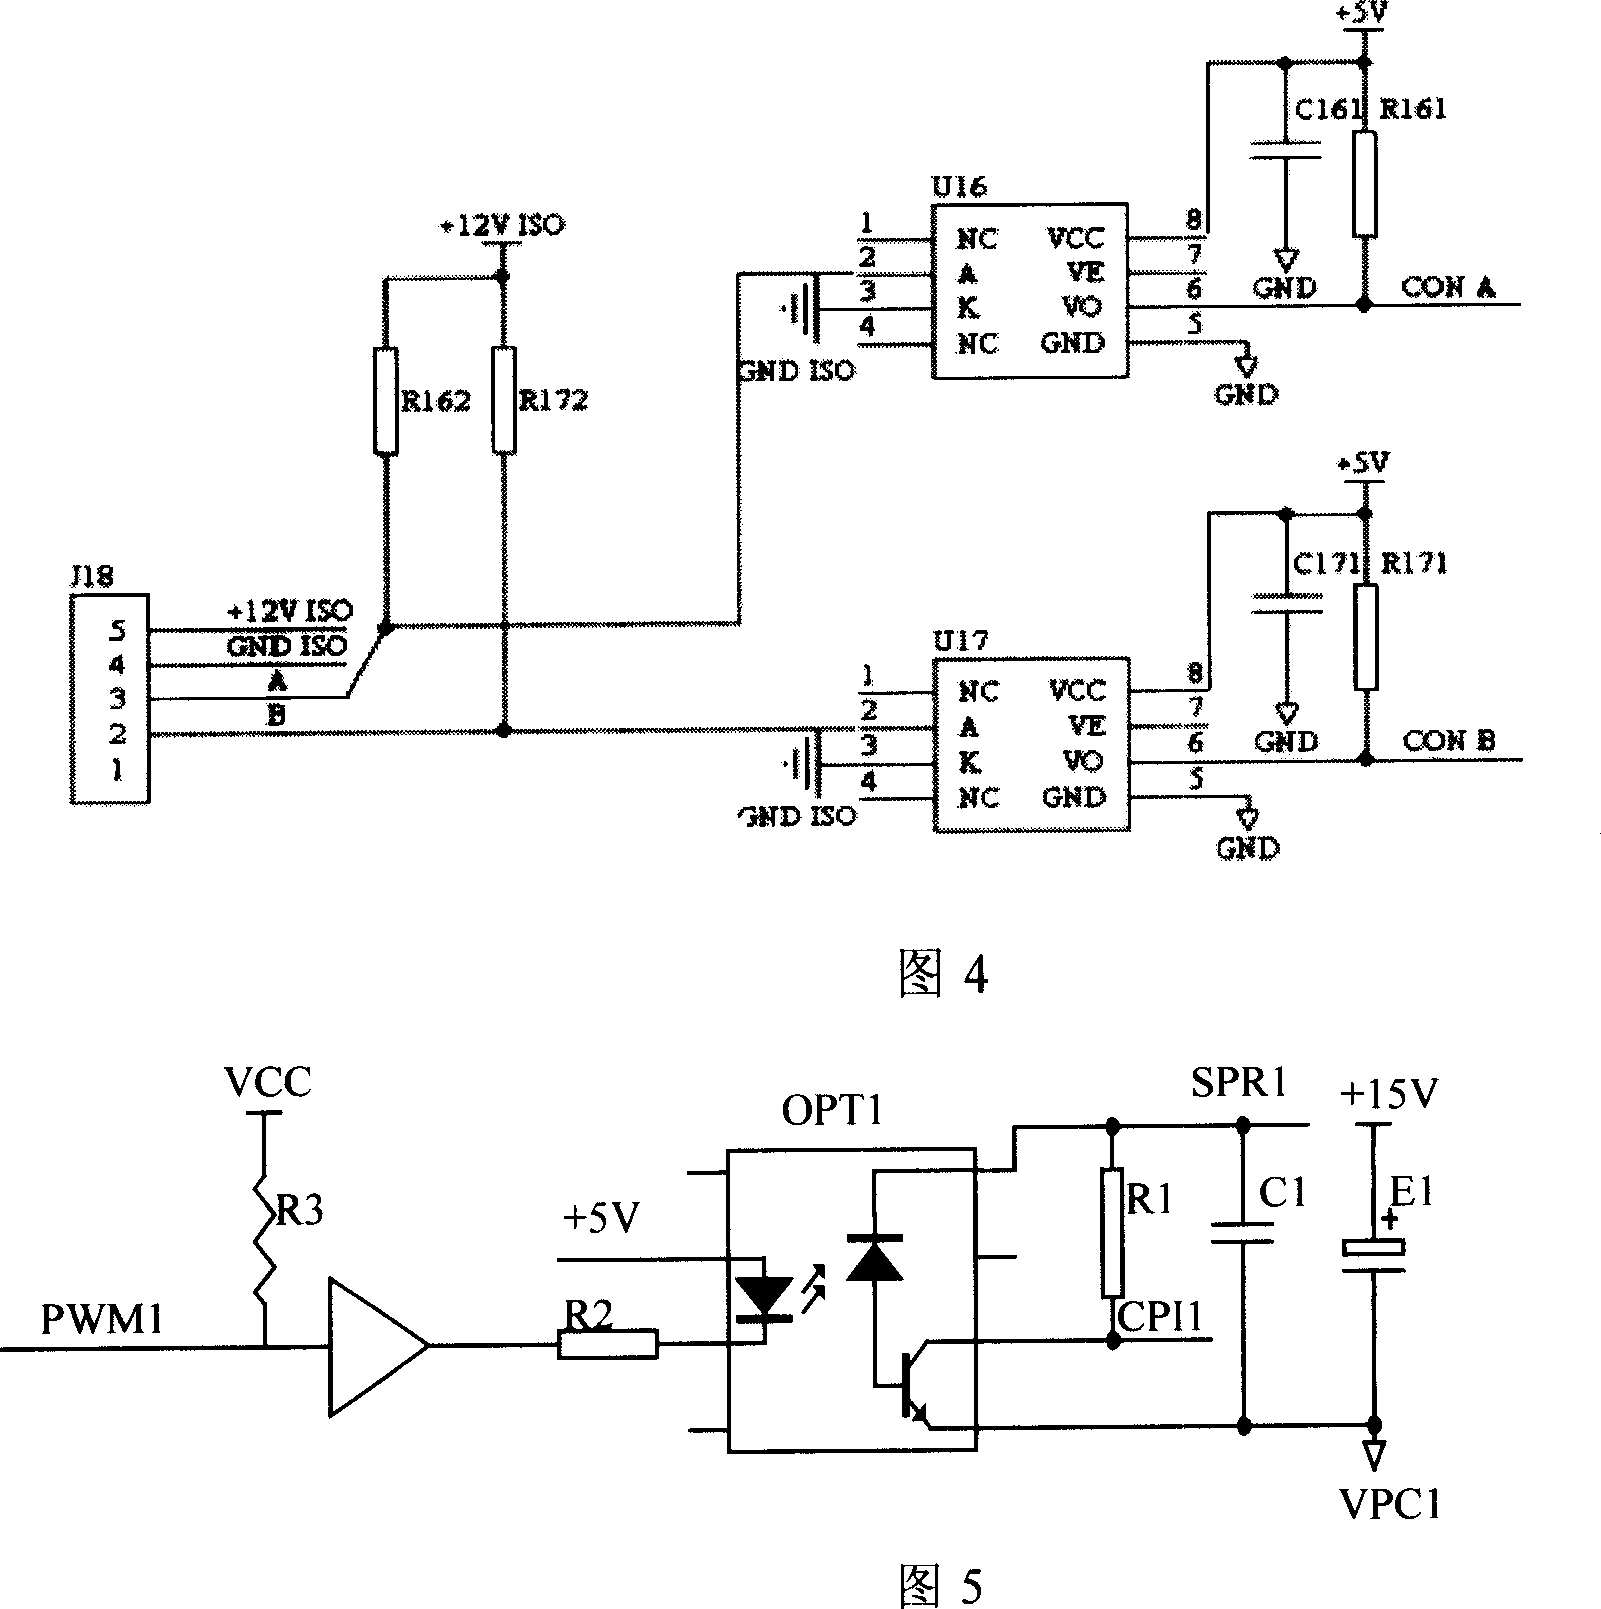 An experimental simulation system of variable speed constant frequency dual feed wind generator